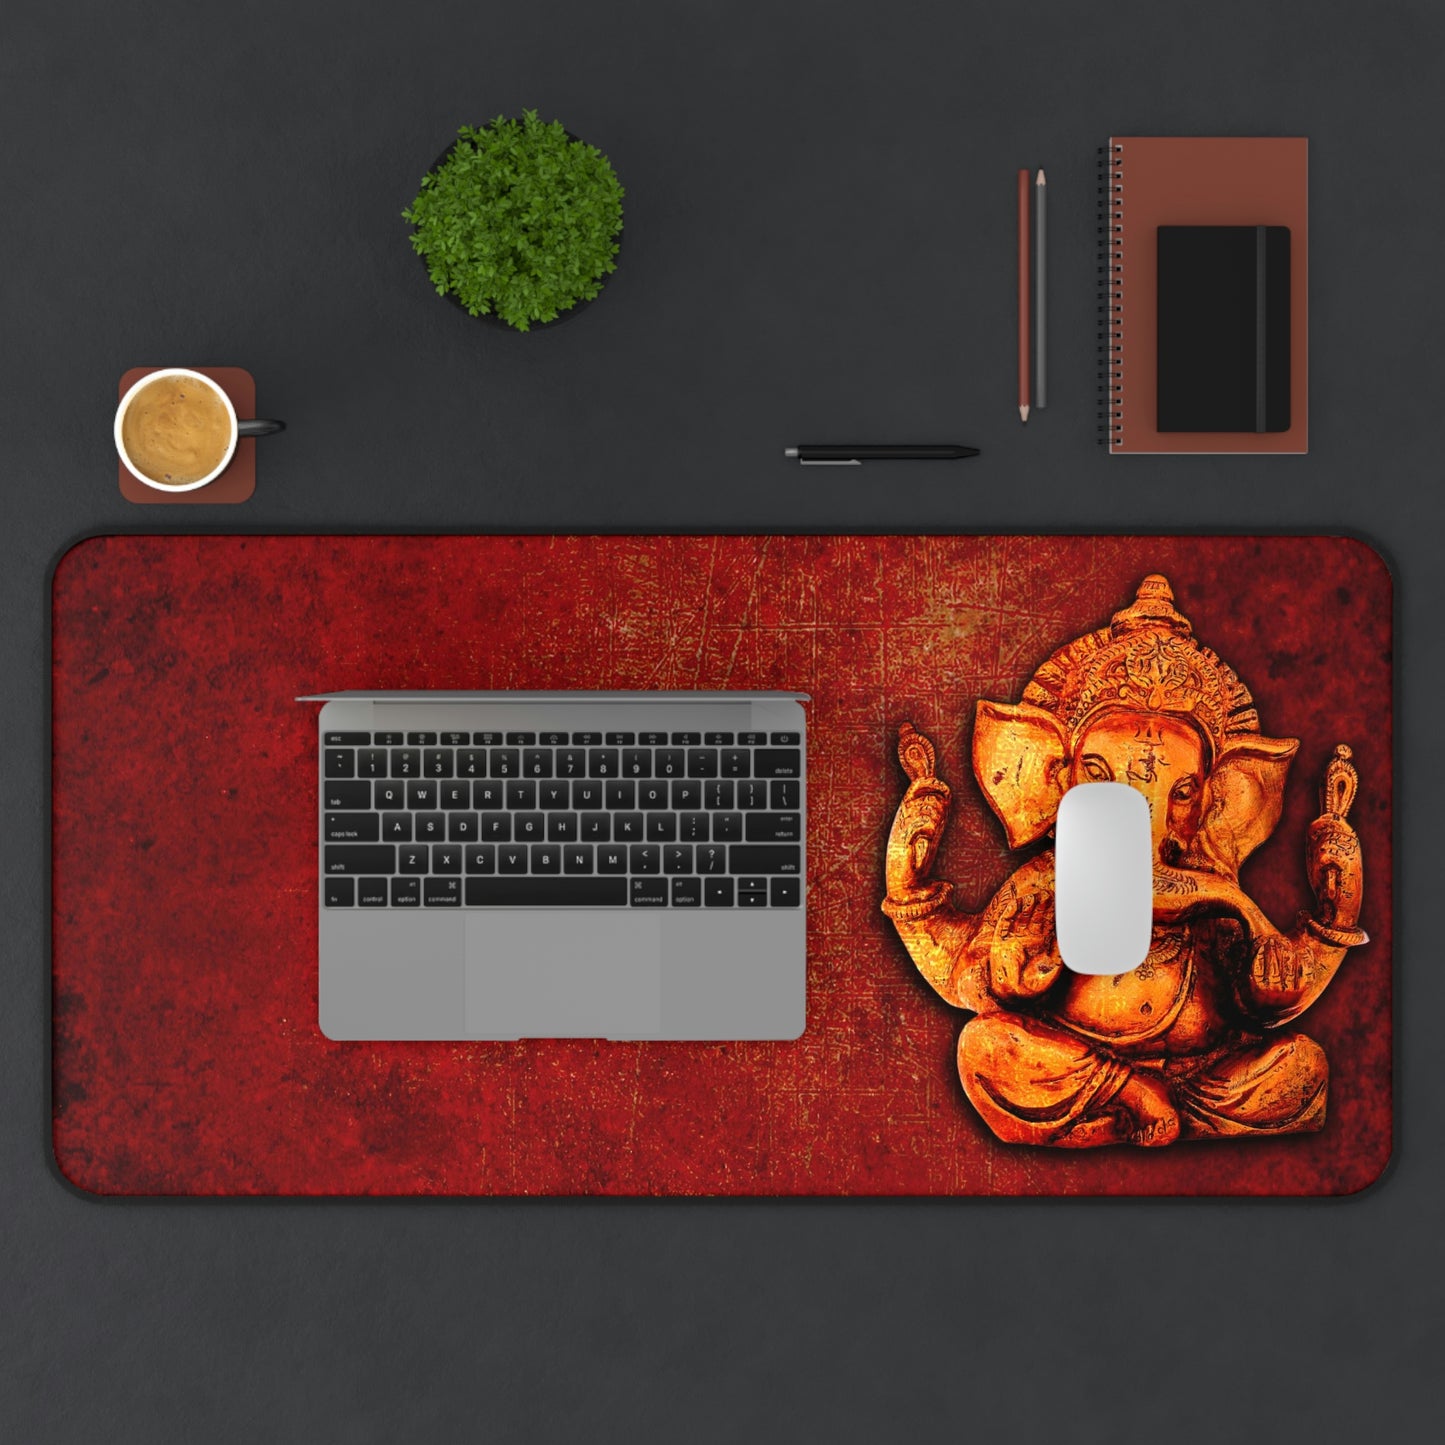 Gold Ganesha on Lava Red Background Print on Neoprene Desk Mat 15.5 by 31 with laptop